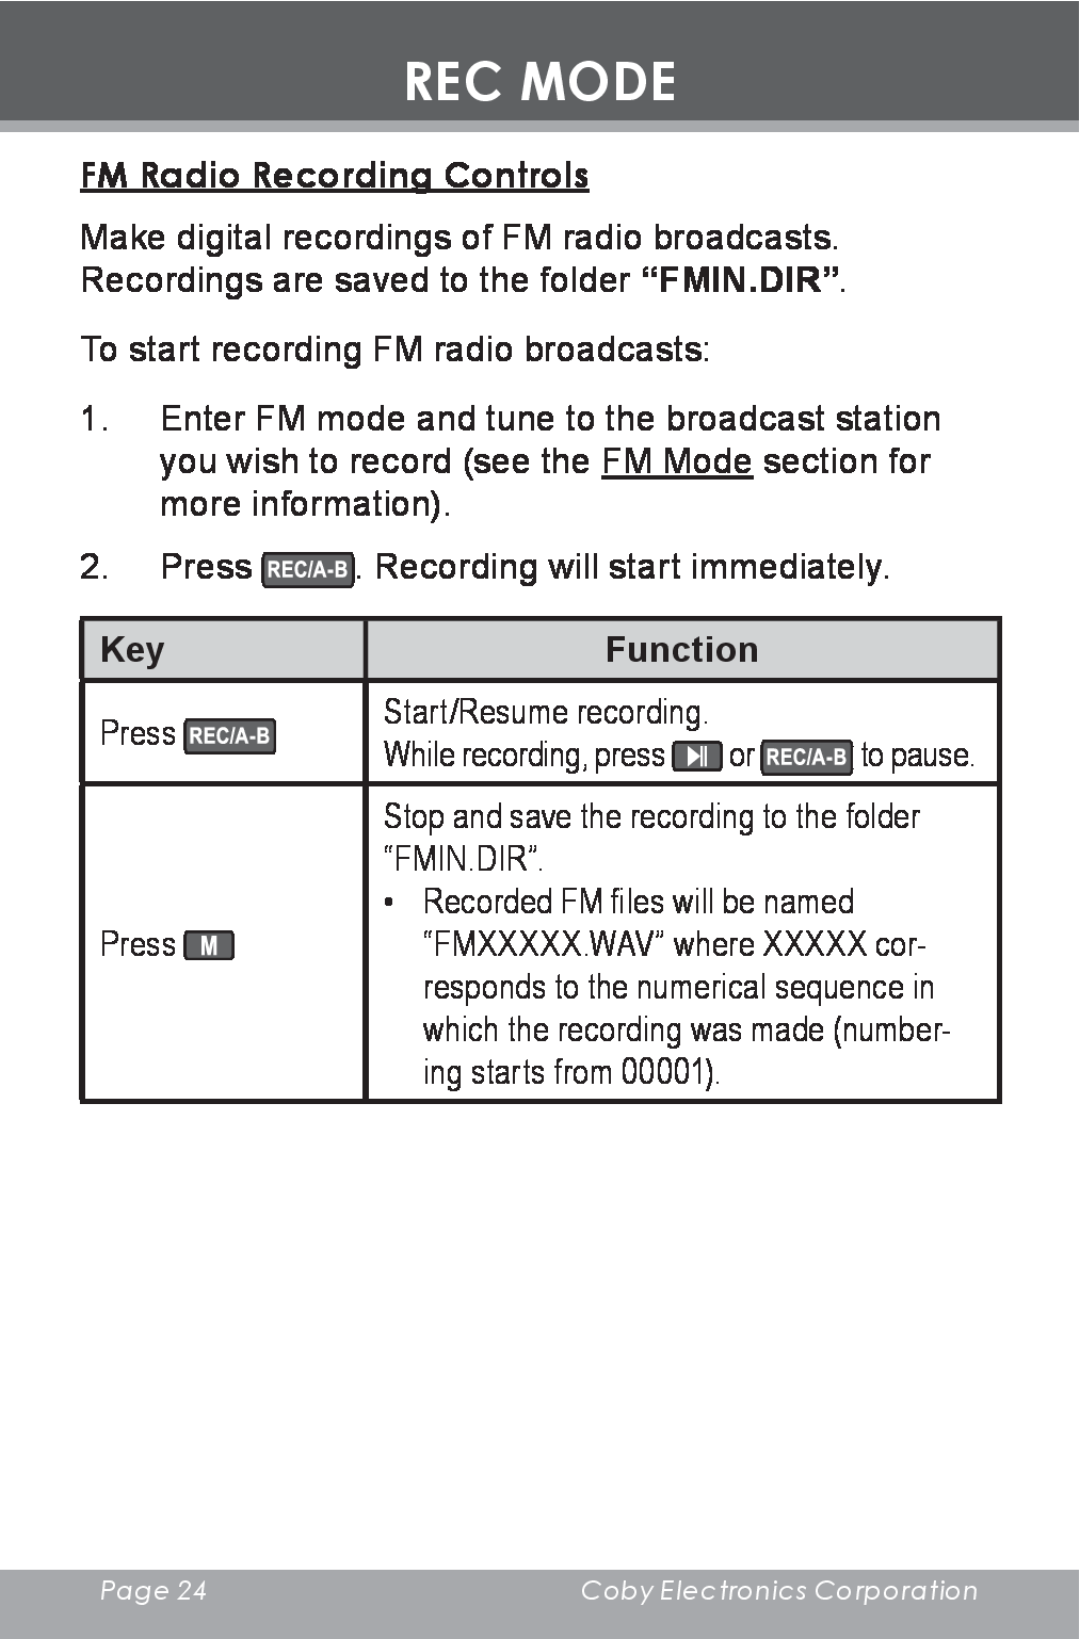 COBY electronic MP-C643 instruction manual FM Radio Recording Controls, Rec Mode, Function 